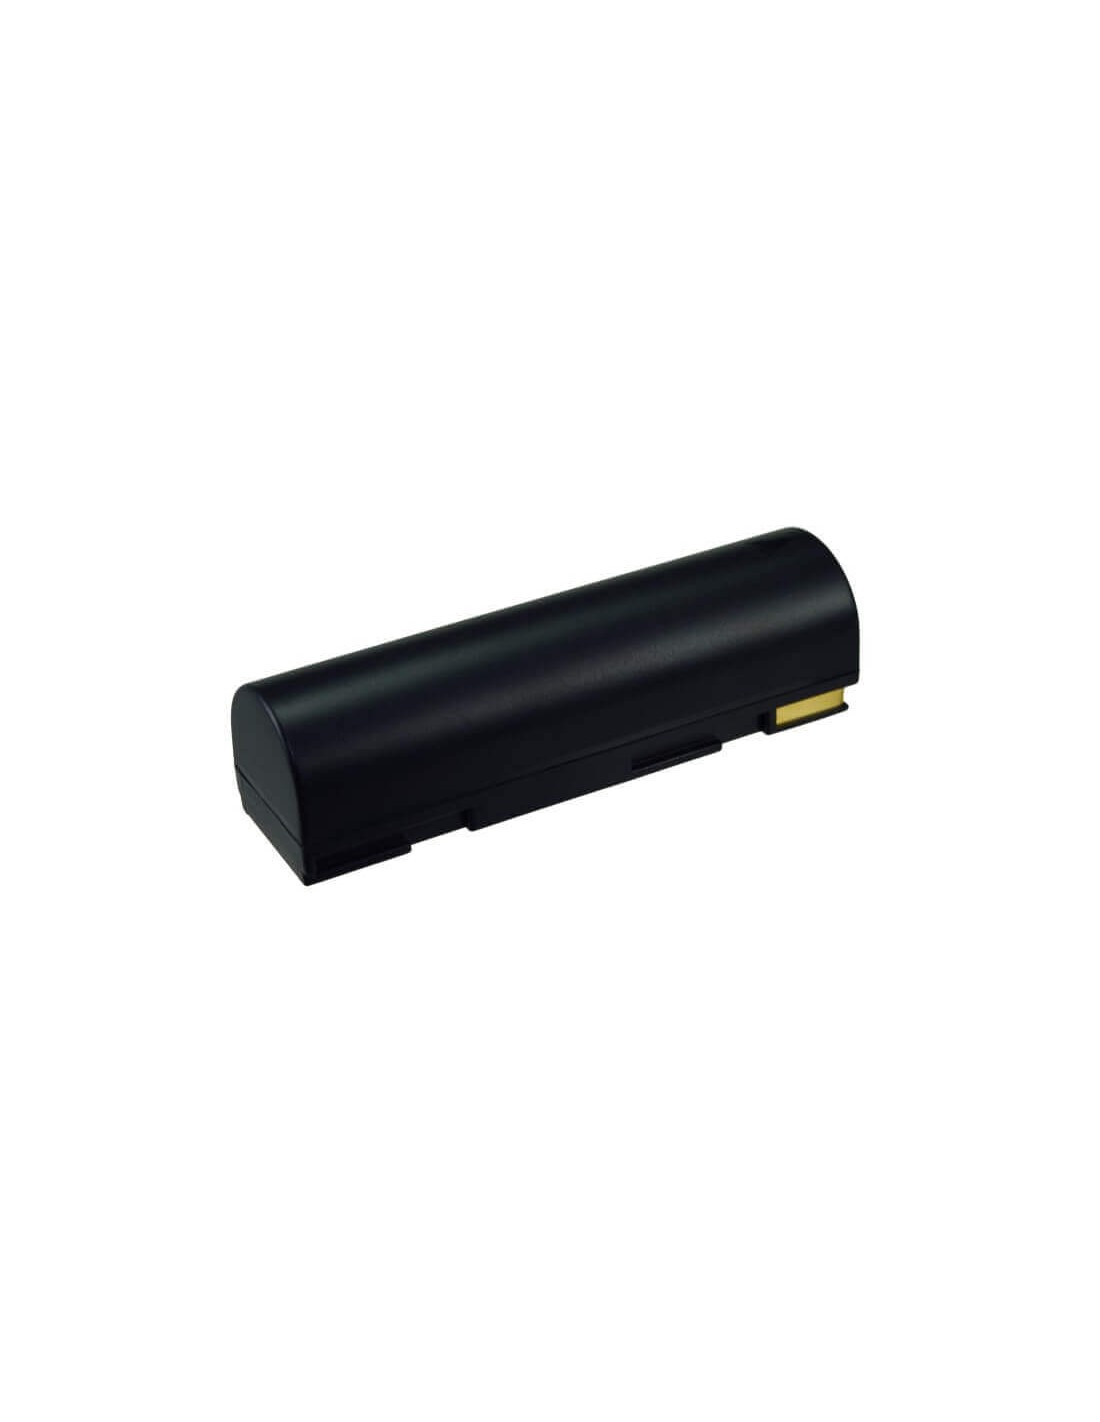 Battery for Toshiba Pdr-m3 3.7V, 1850mAh - 6.85Wh